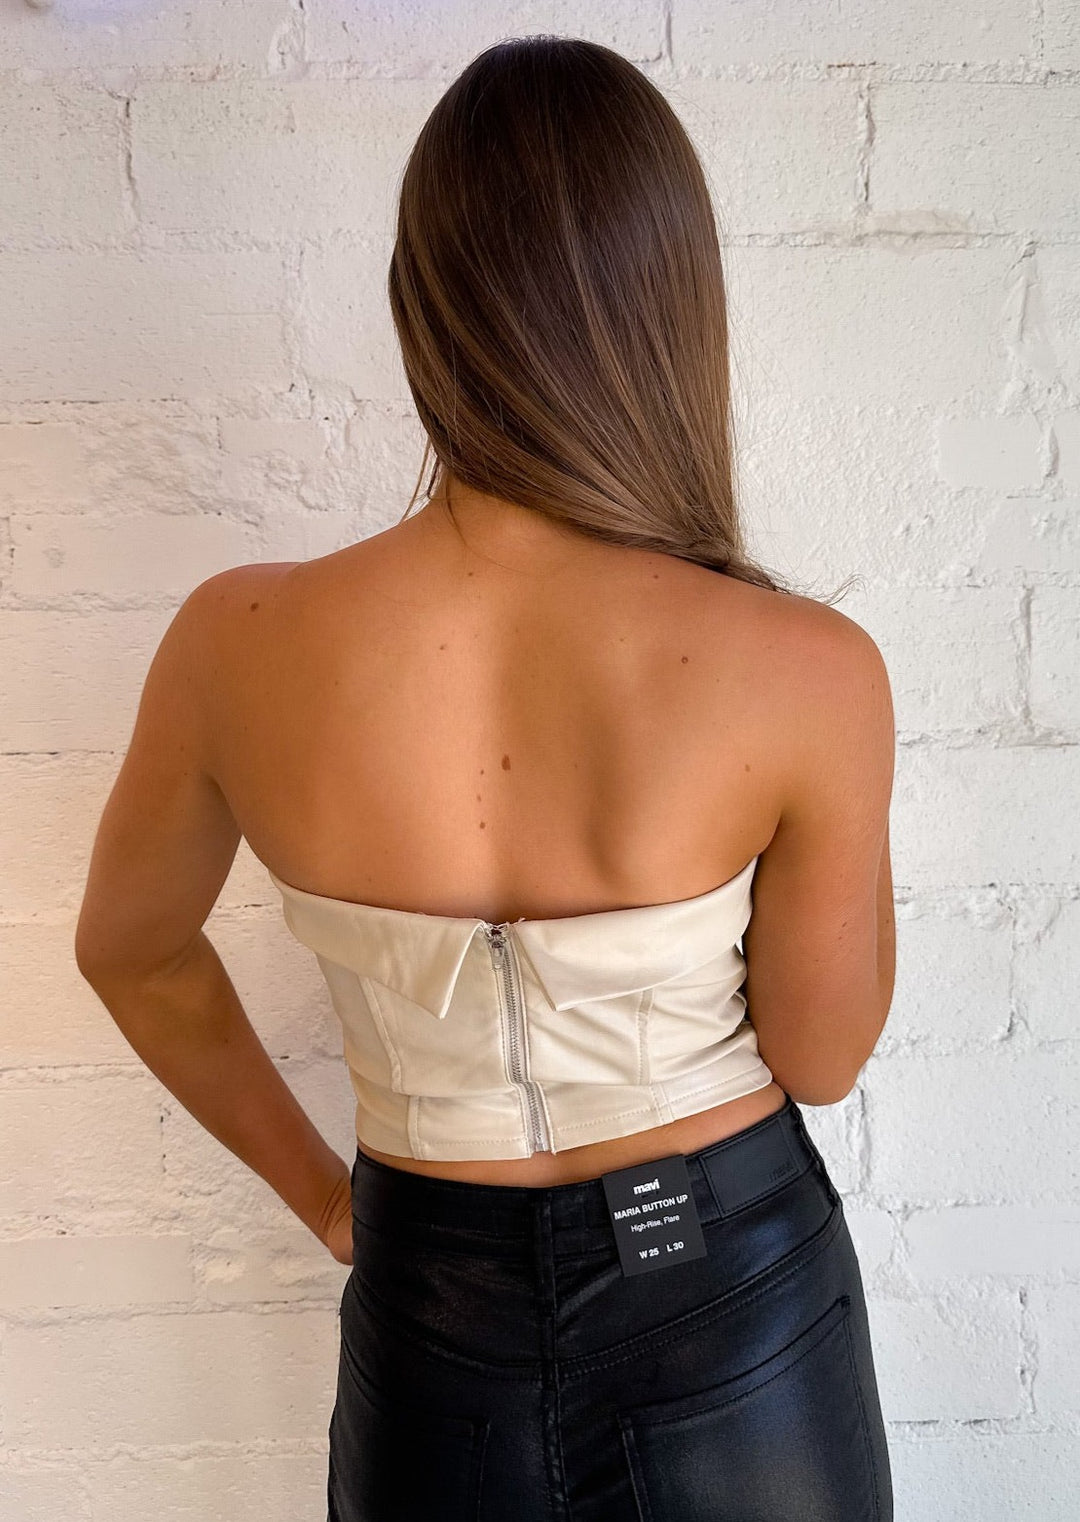 Party Scene Corset Top, Tops, Adeline, Adeline, dallas boutique, dallas texas, texas boutique, women's boutique dallas, adeline boutique, dallas boutique, trendy boutique, affordable boutique